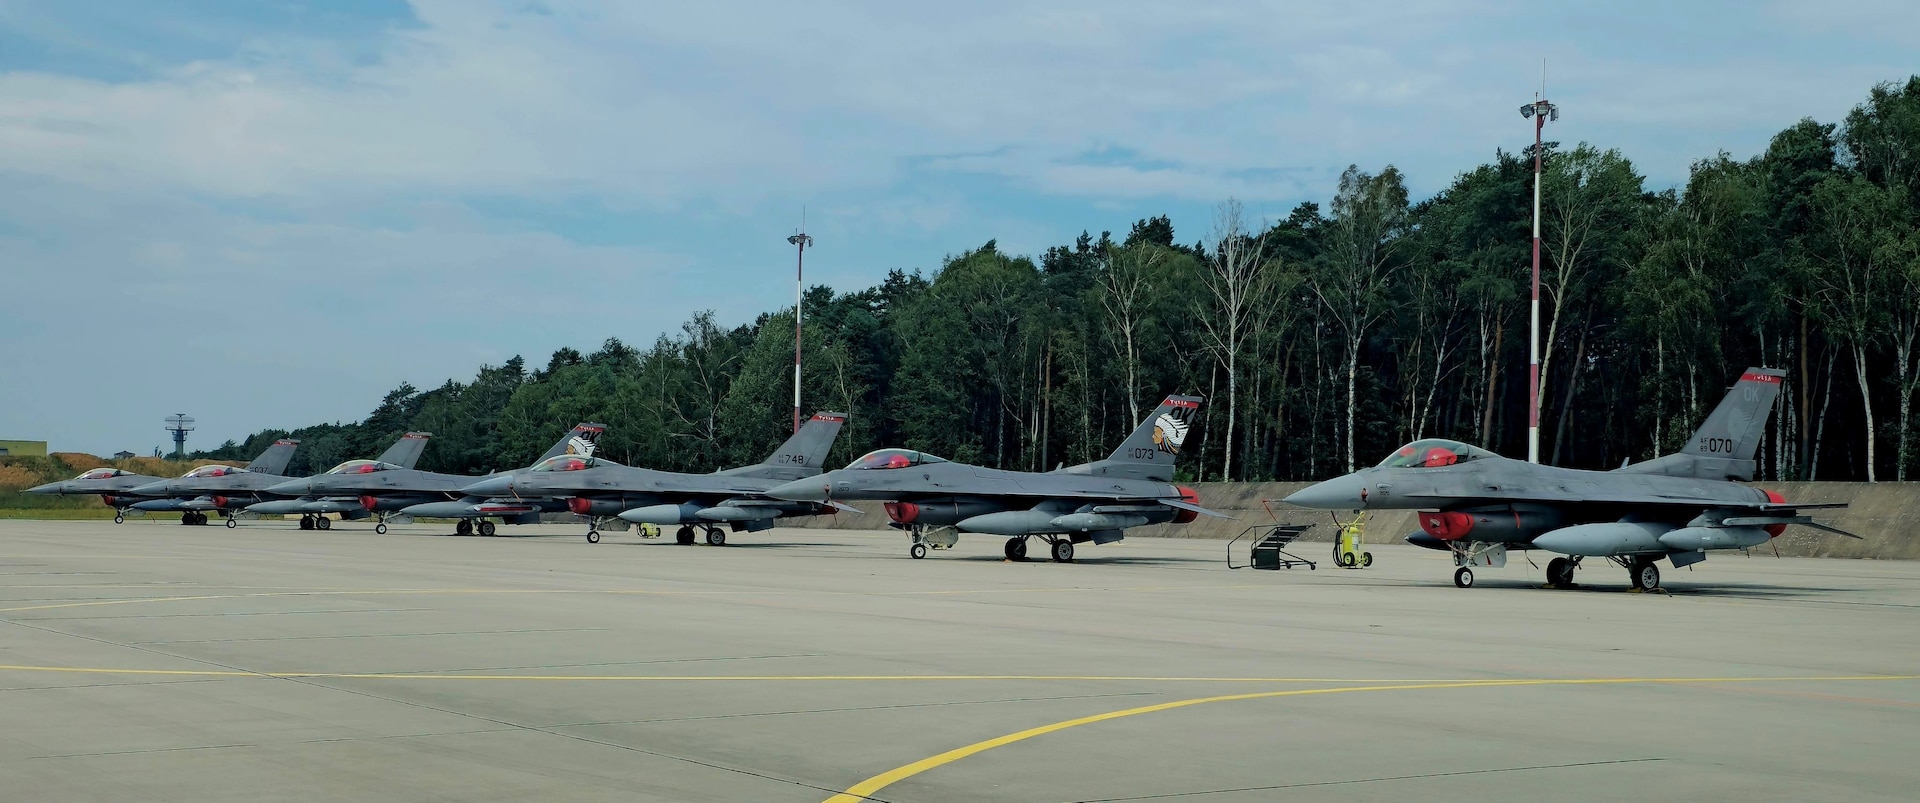 Six U.S. Air Force F-16 Fighting Falcons assigned to the 138th Fighter Wing at Tulsa Air National Guard (ANG) Base, Oklahoma, will began operations at Łask Air Base, Poland